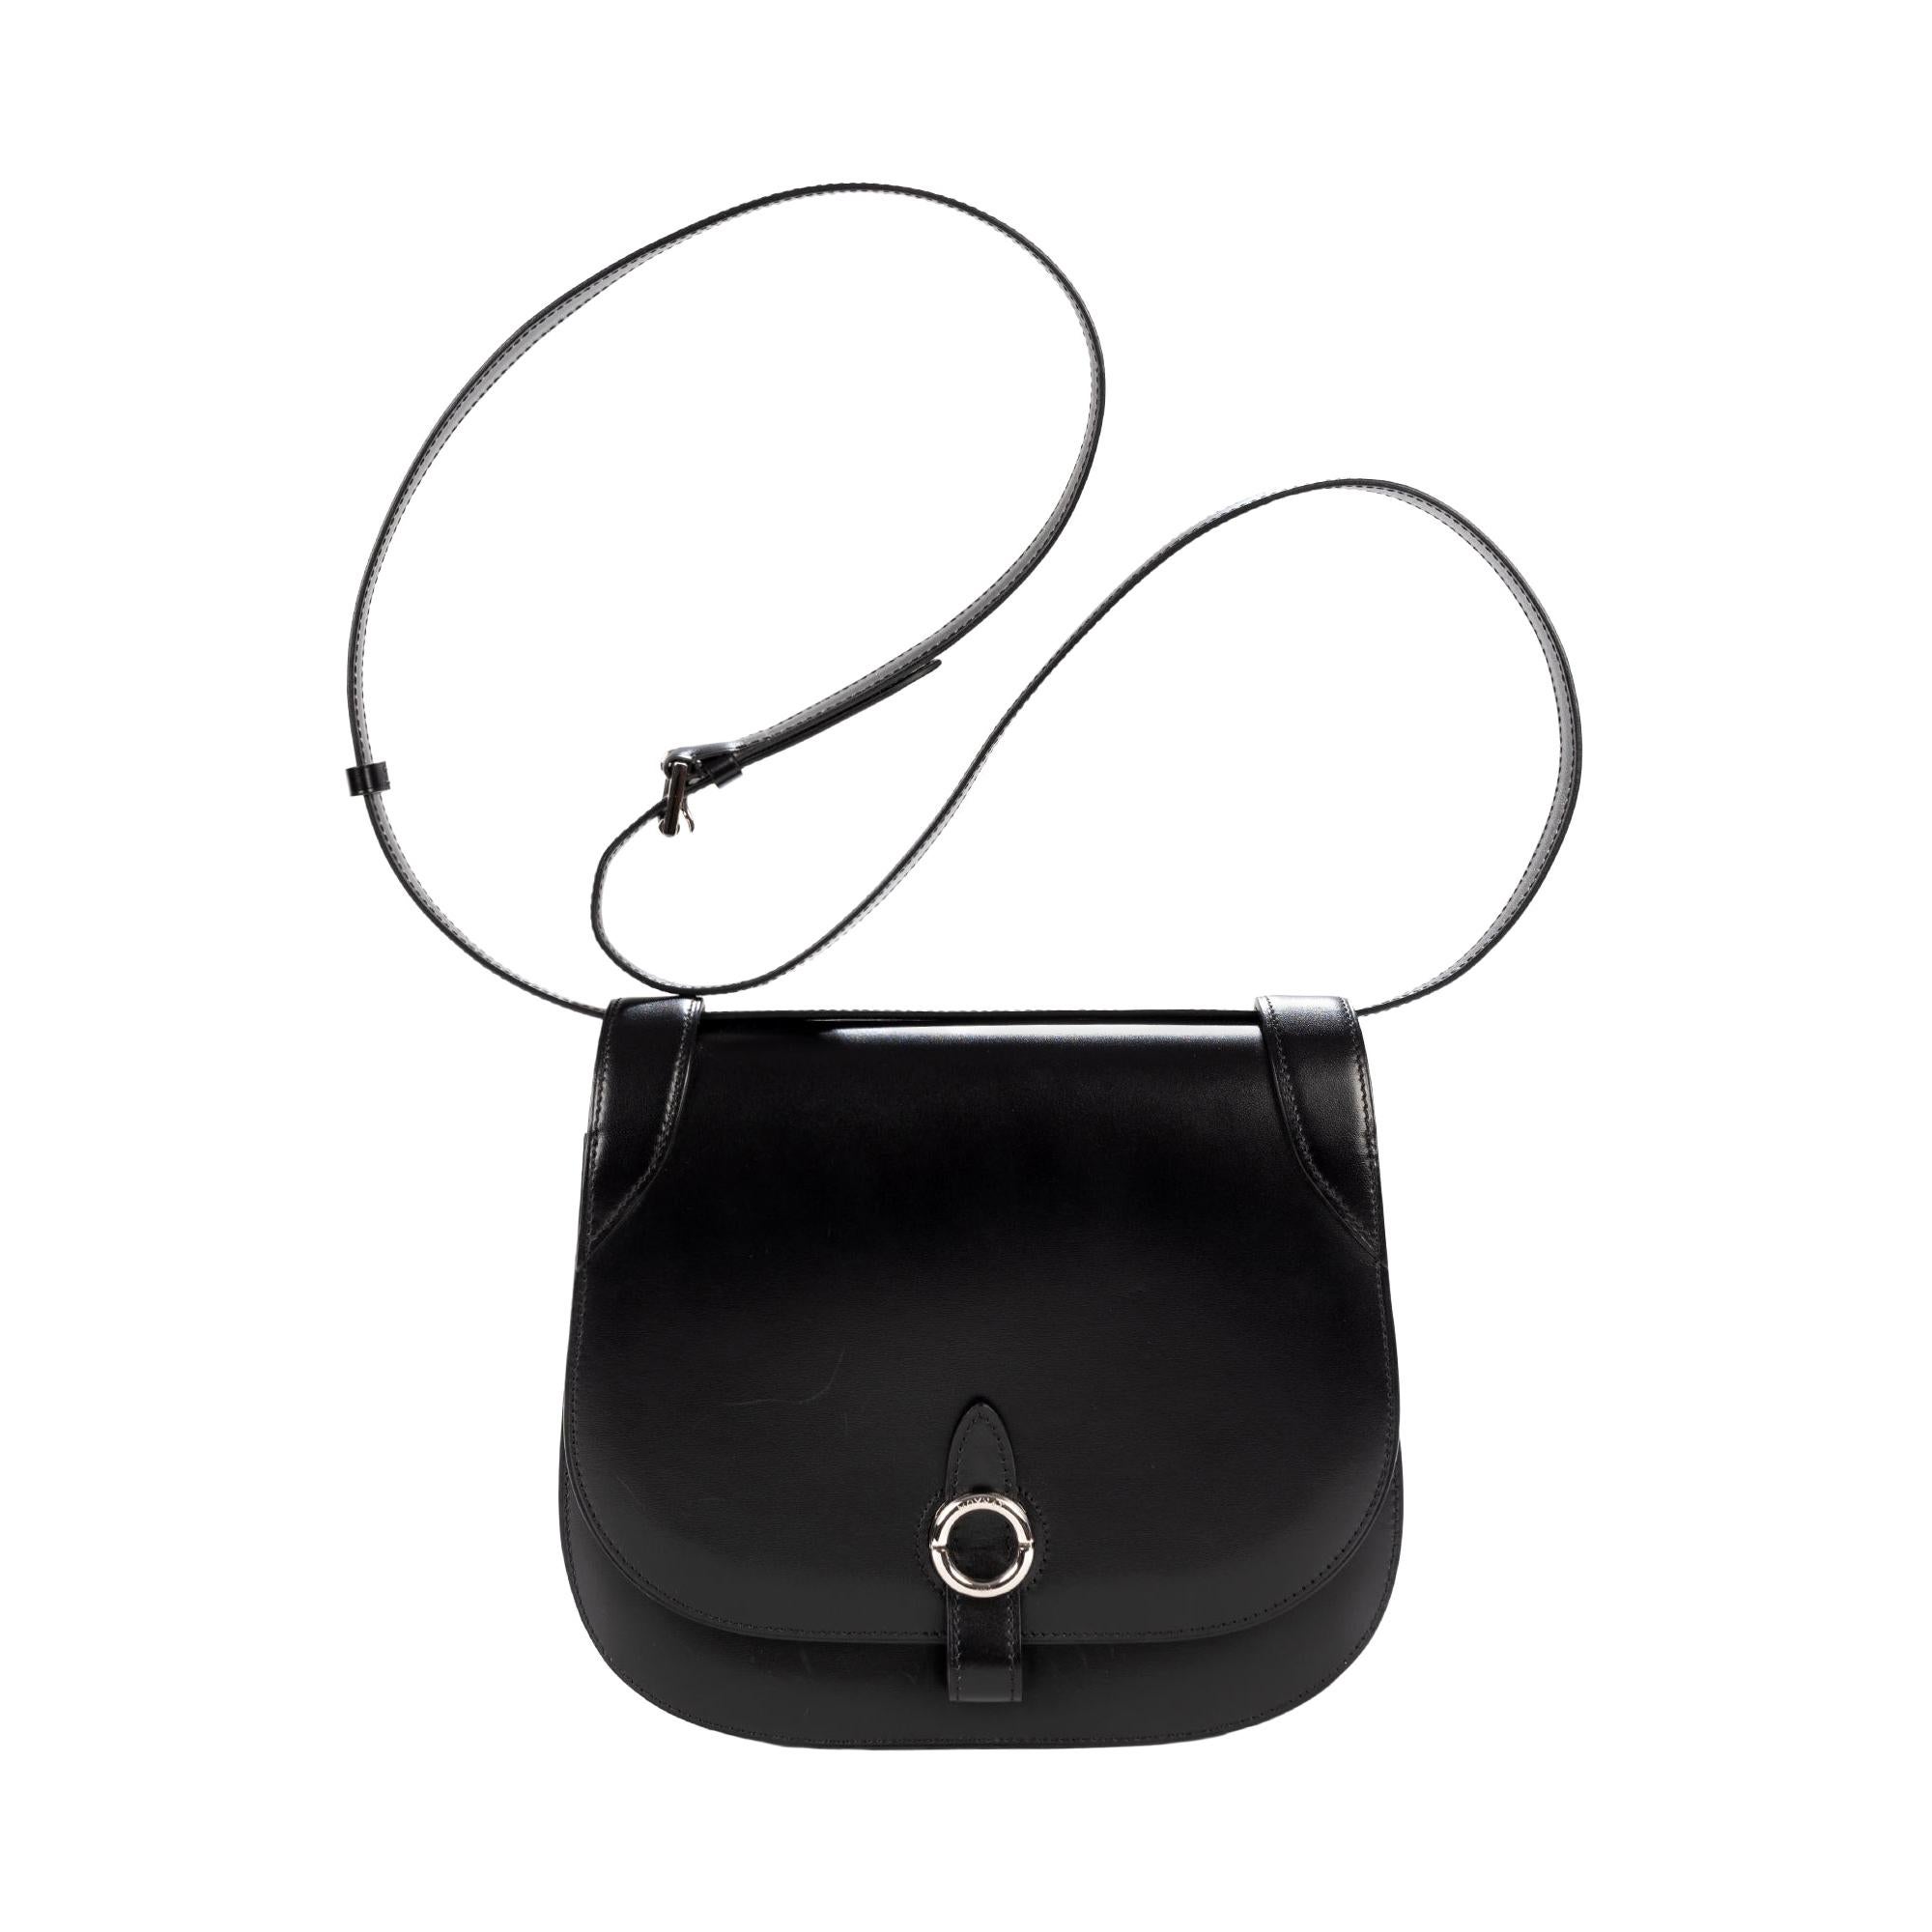 MOYNAT Women Sale, Up To 70% Off